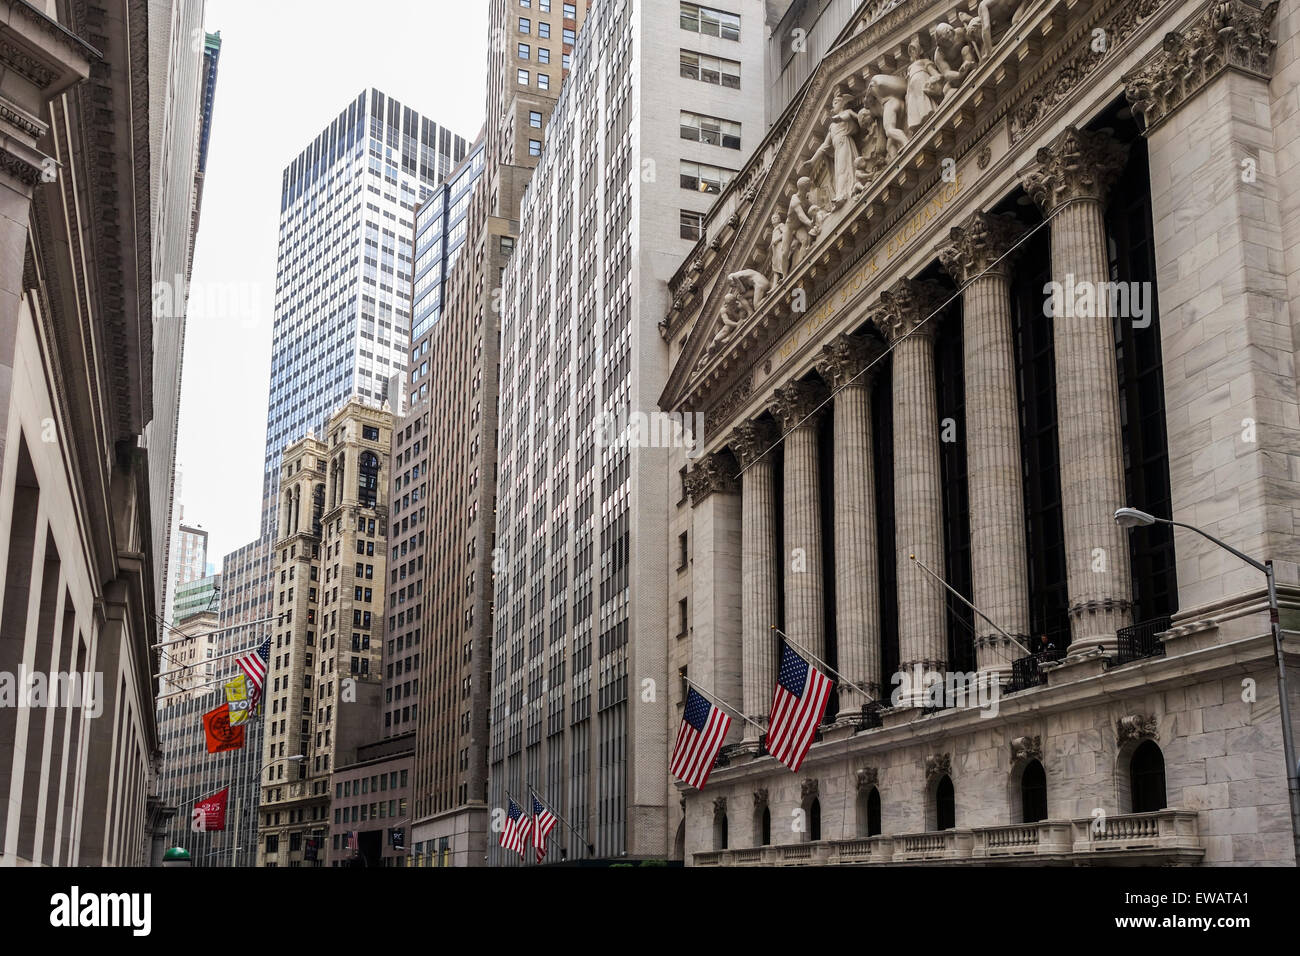 The New York Stock Exchange on Wall Street, the world's largest stock exchange, NYC, lower Manhattan, United states. USA. Stock Photo